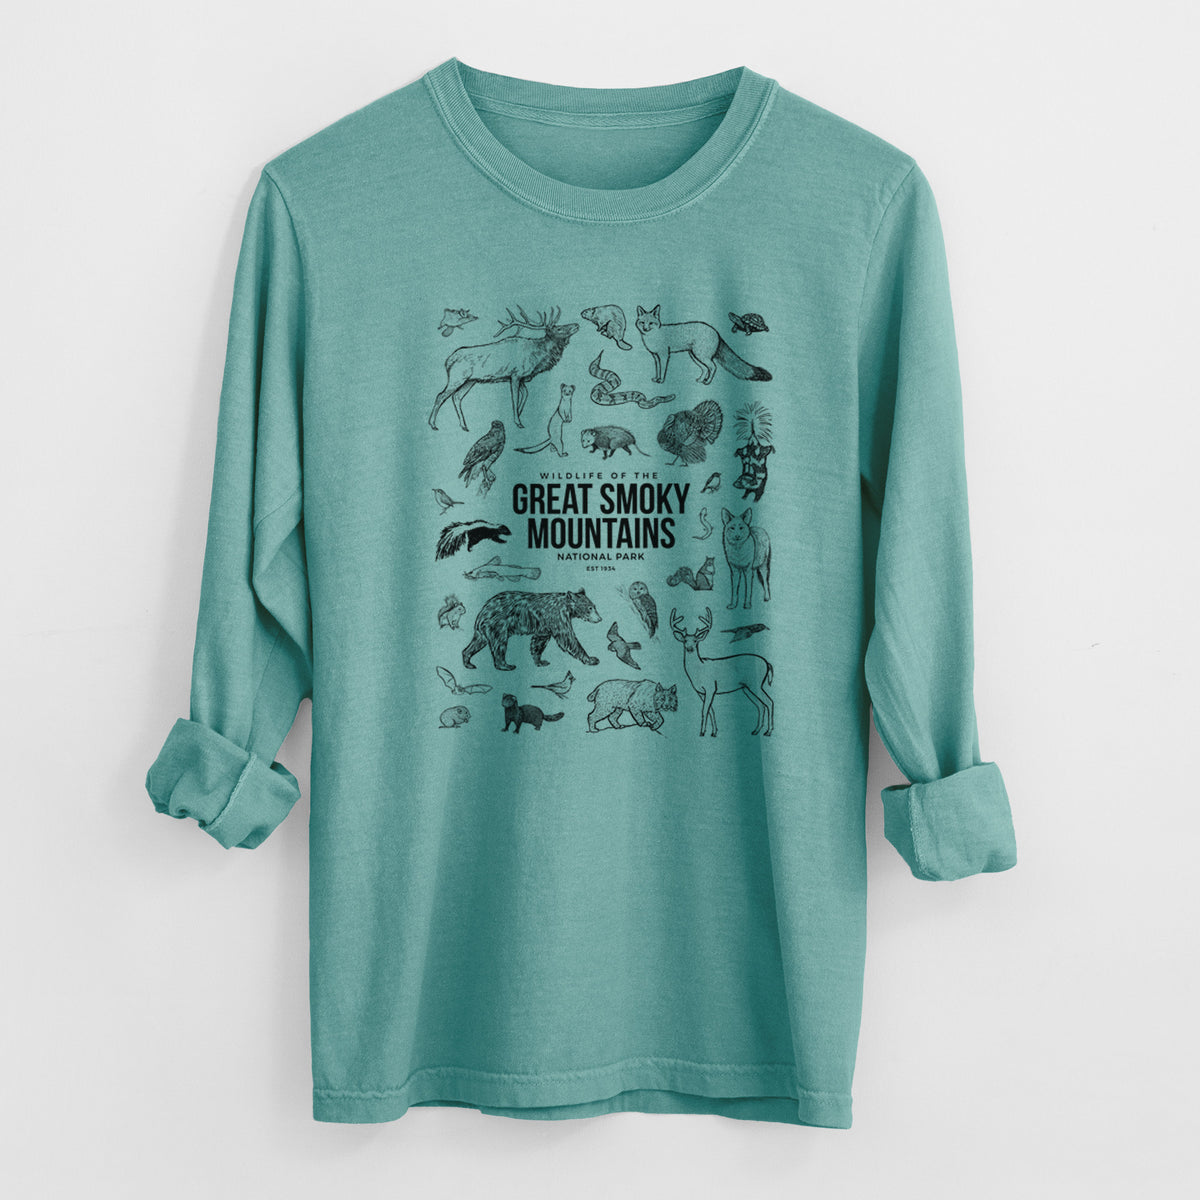 Wildlife of the Great Smoky Mountains National Park - Heavyweight 100% Cotton Long Sleeve